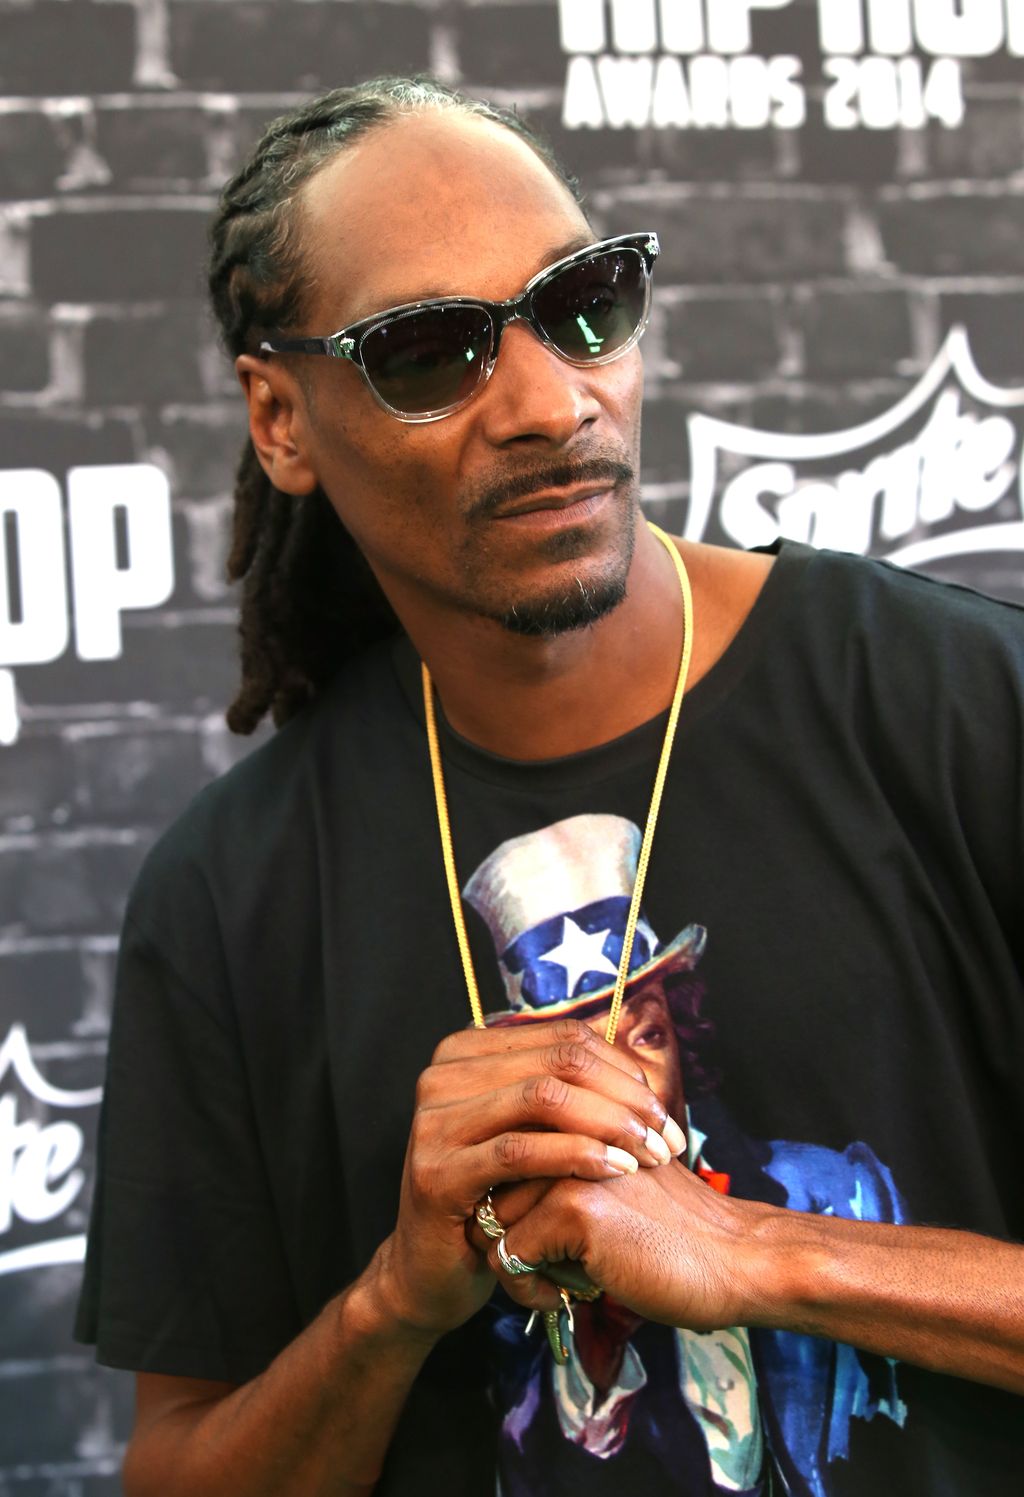 Snoop Dogg attends the BET Hip Hop Awards 2014 on September 20, 2014. | Photo: GettyImages